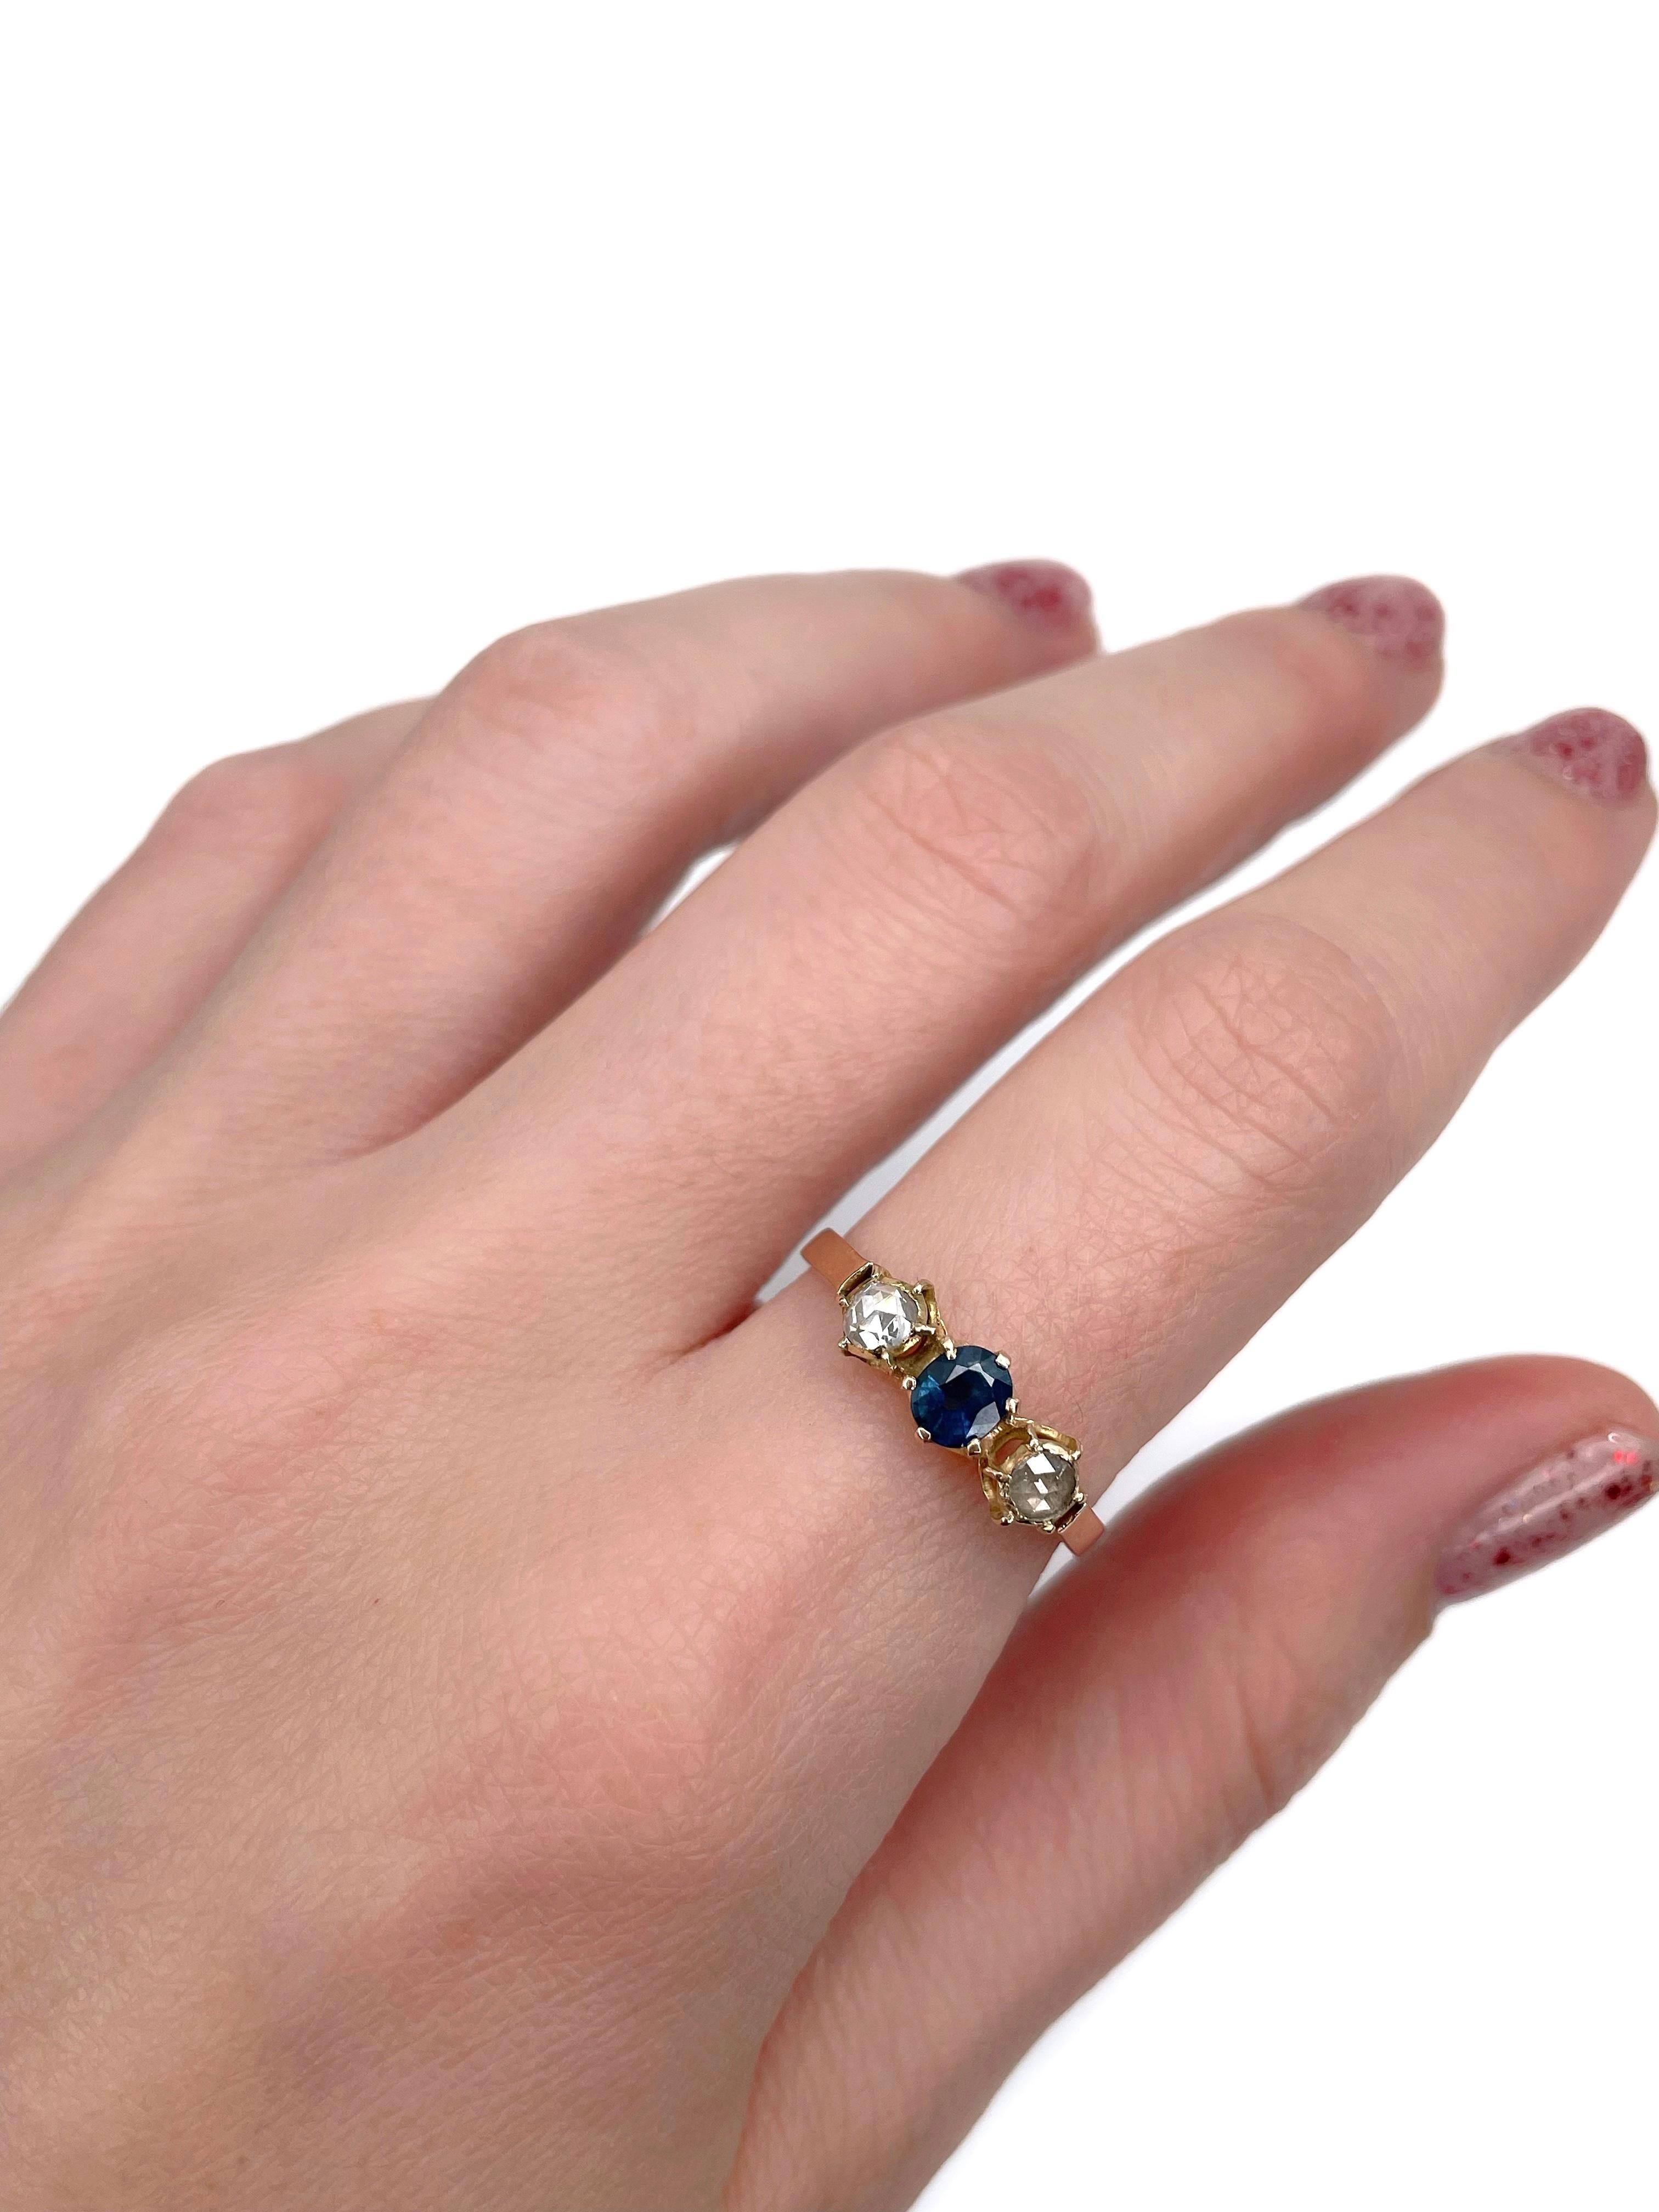 This is a Victorian three-stone ring crafted in 14K gold. Circa 1890. 

The piece features:
- 1 sapphire (oval cut, 0.35ct, B 6/3, P1)
- 2 diamonds (rose cut, TW 0.18ct, STW-TW, P1-P2)

Engraved “5 Juin 1893” inside the shank. 

Weight: 2.23g
Size: